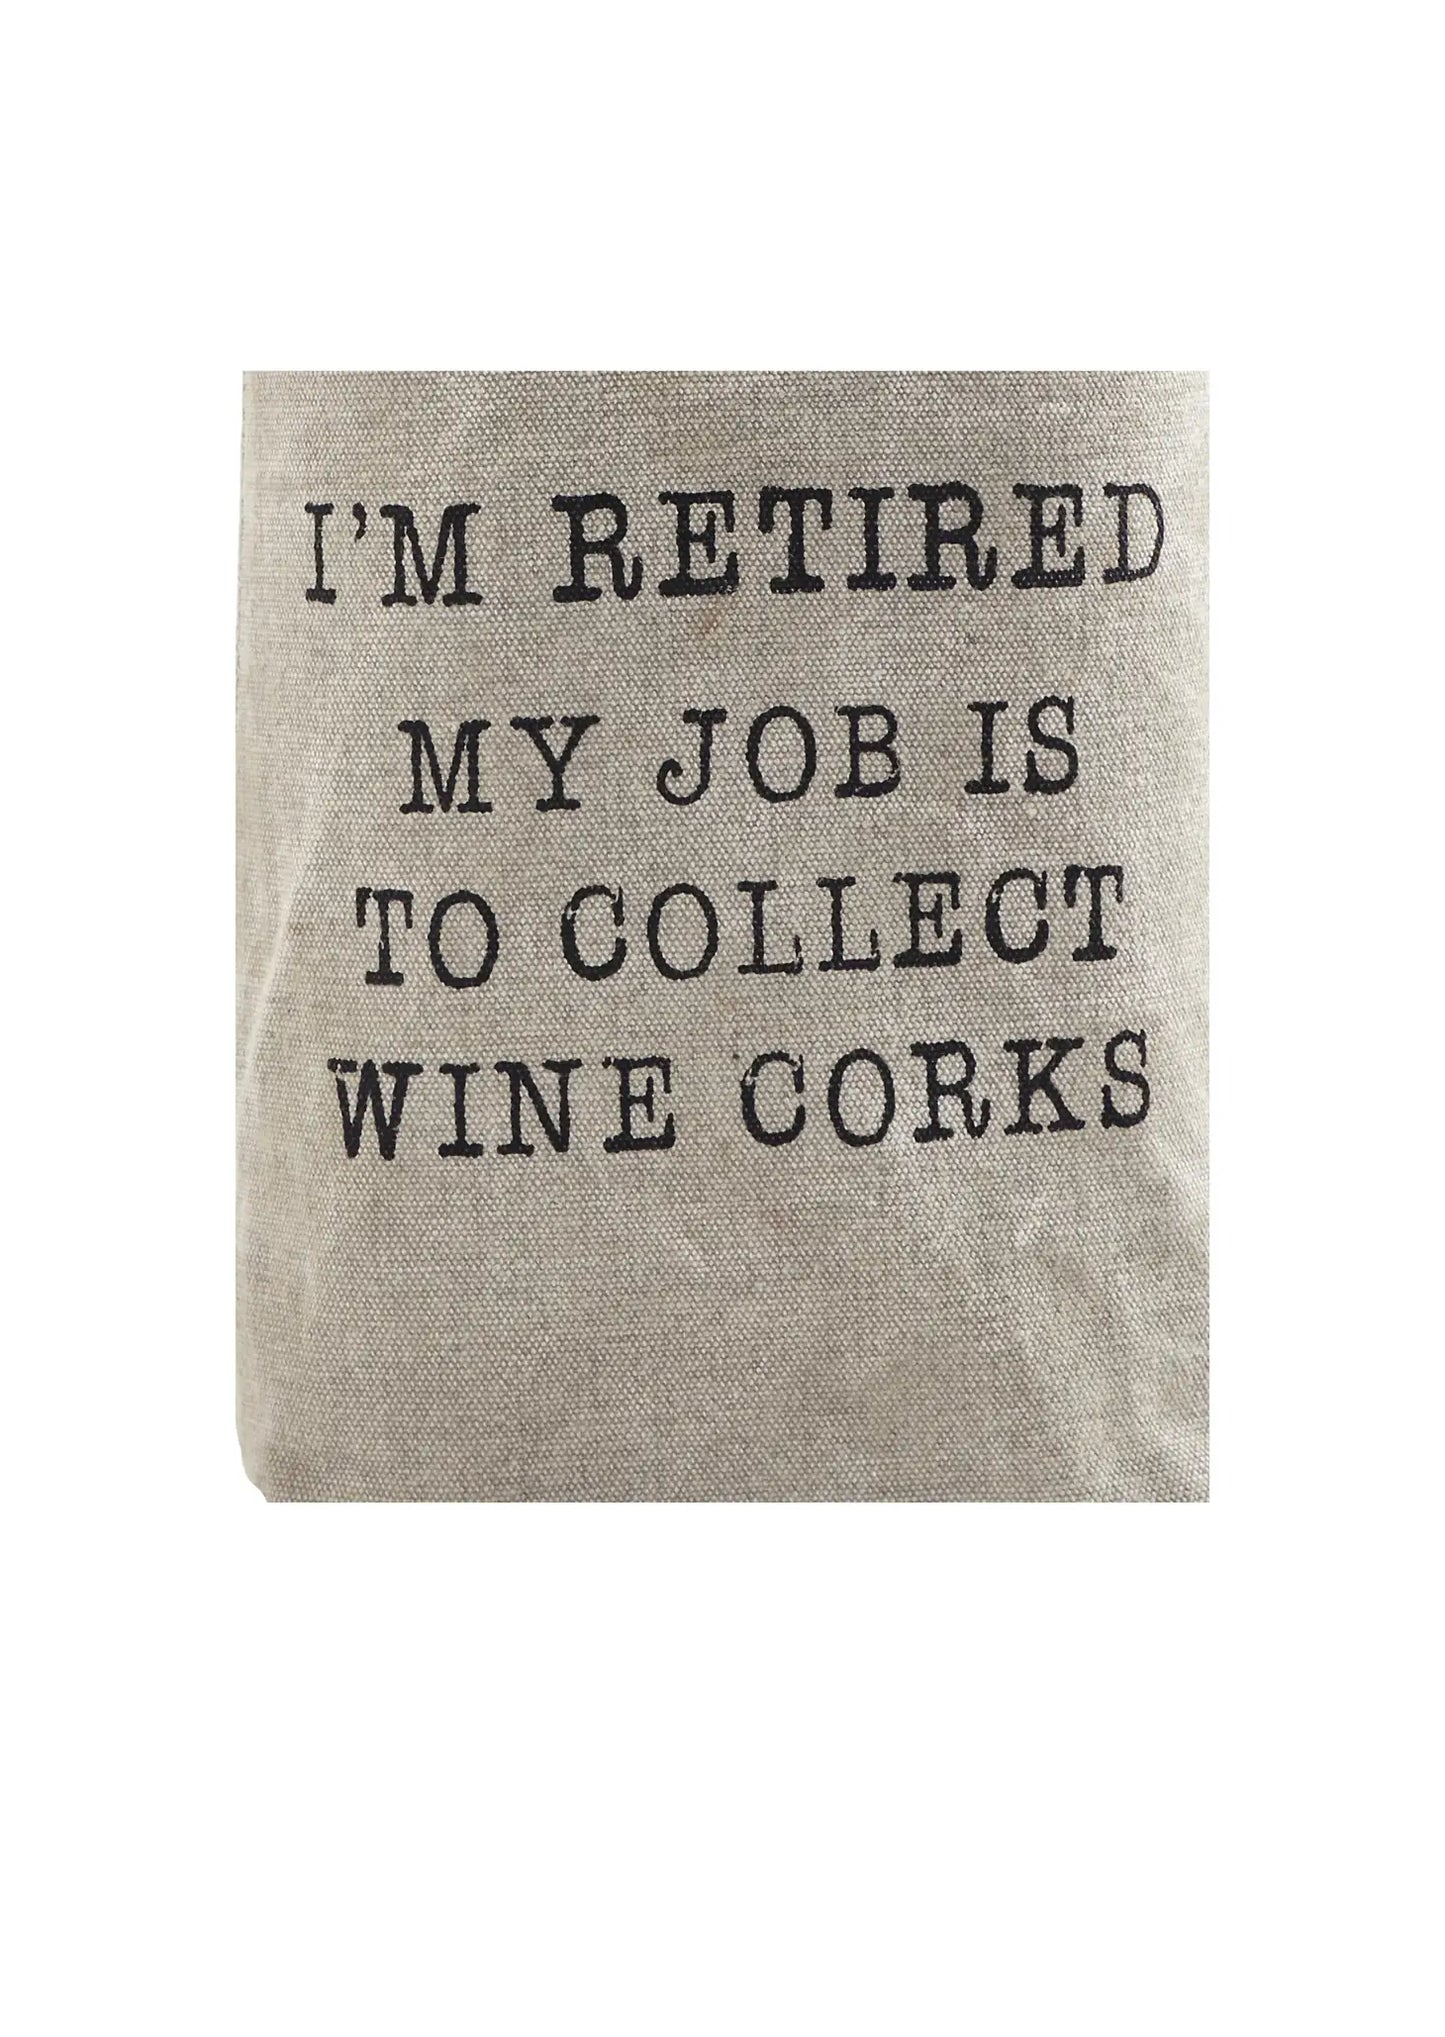 I'm Retired My Job Is to Collect Wine Corks Canvas wine bag